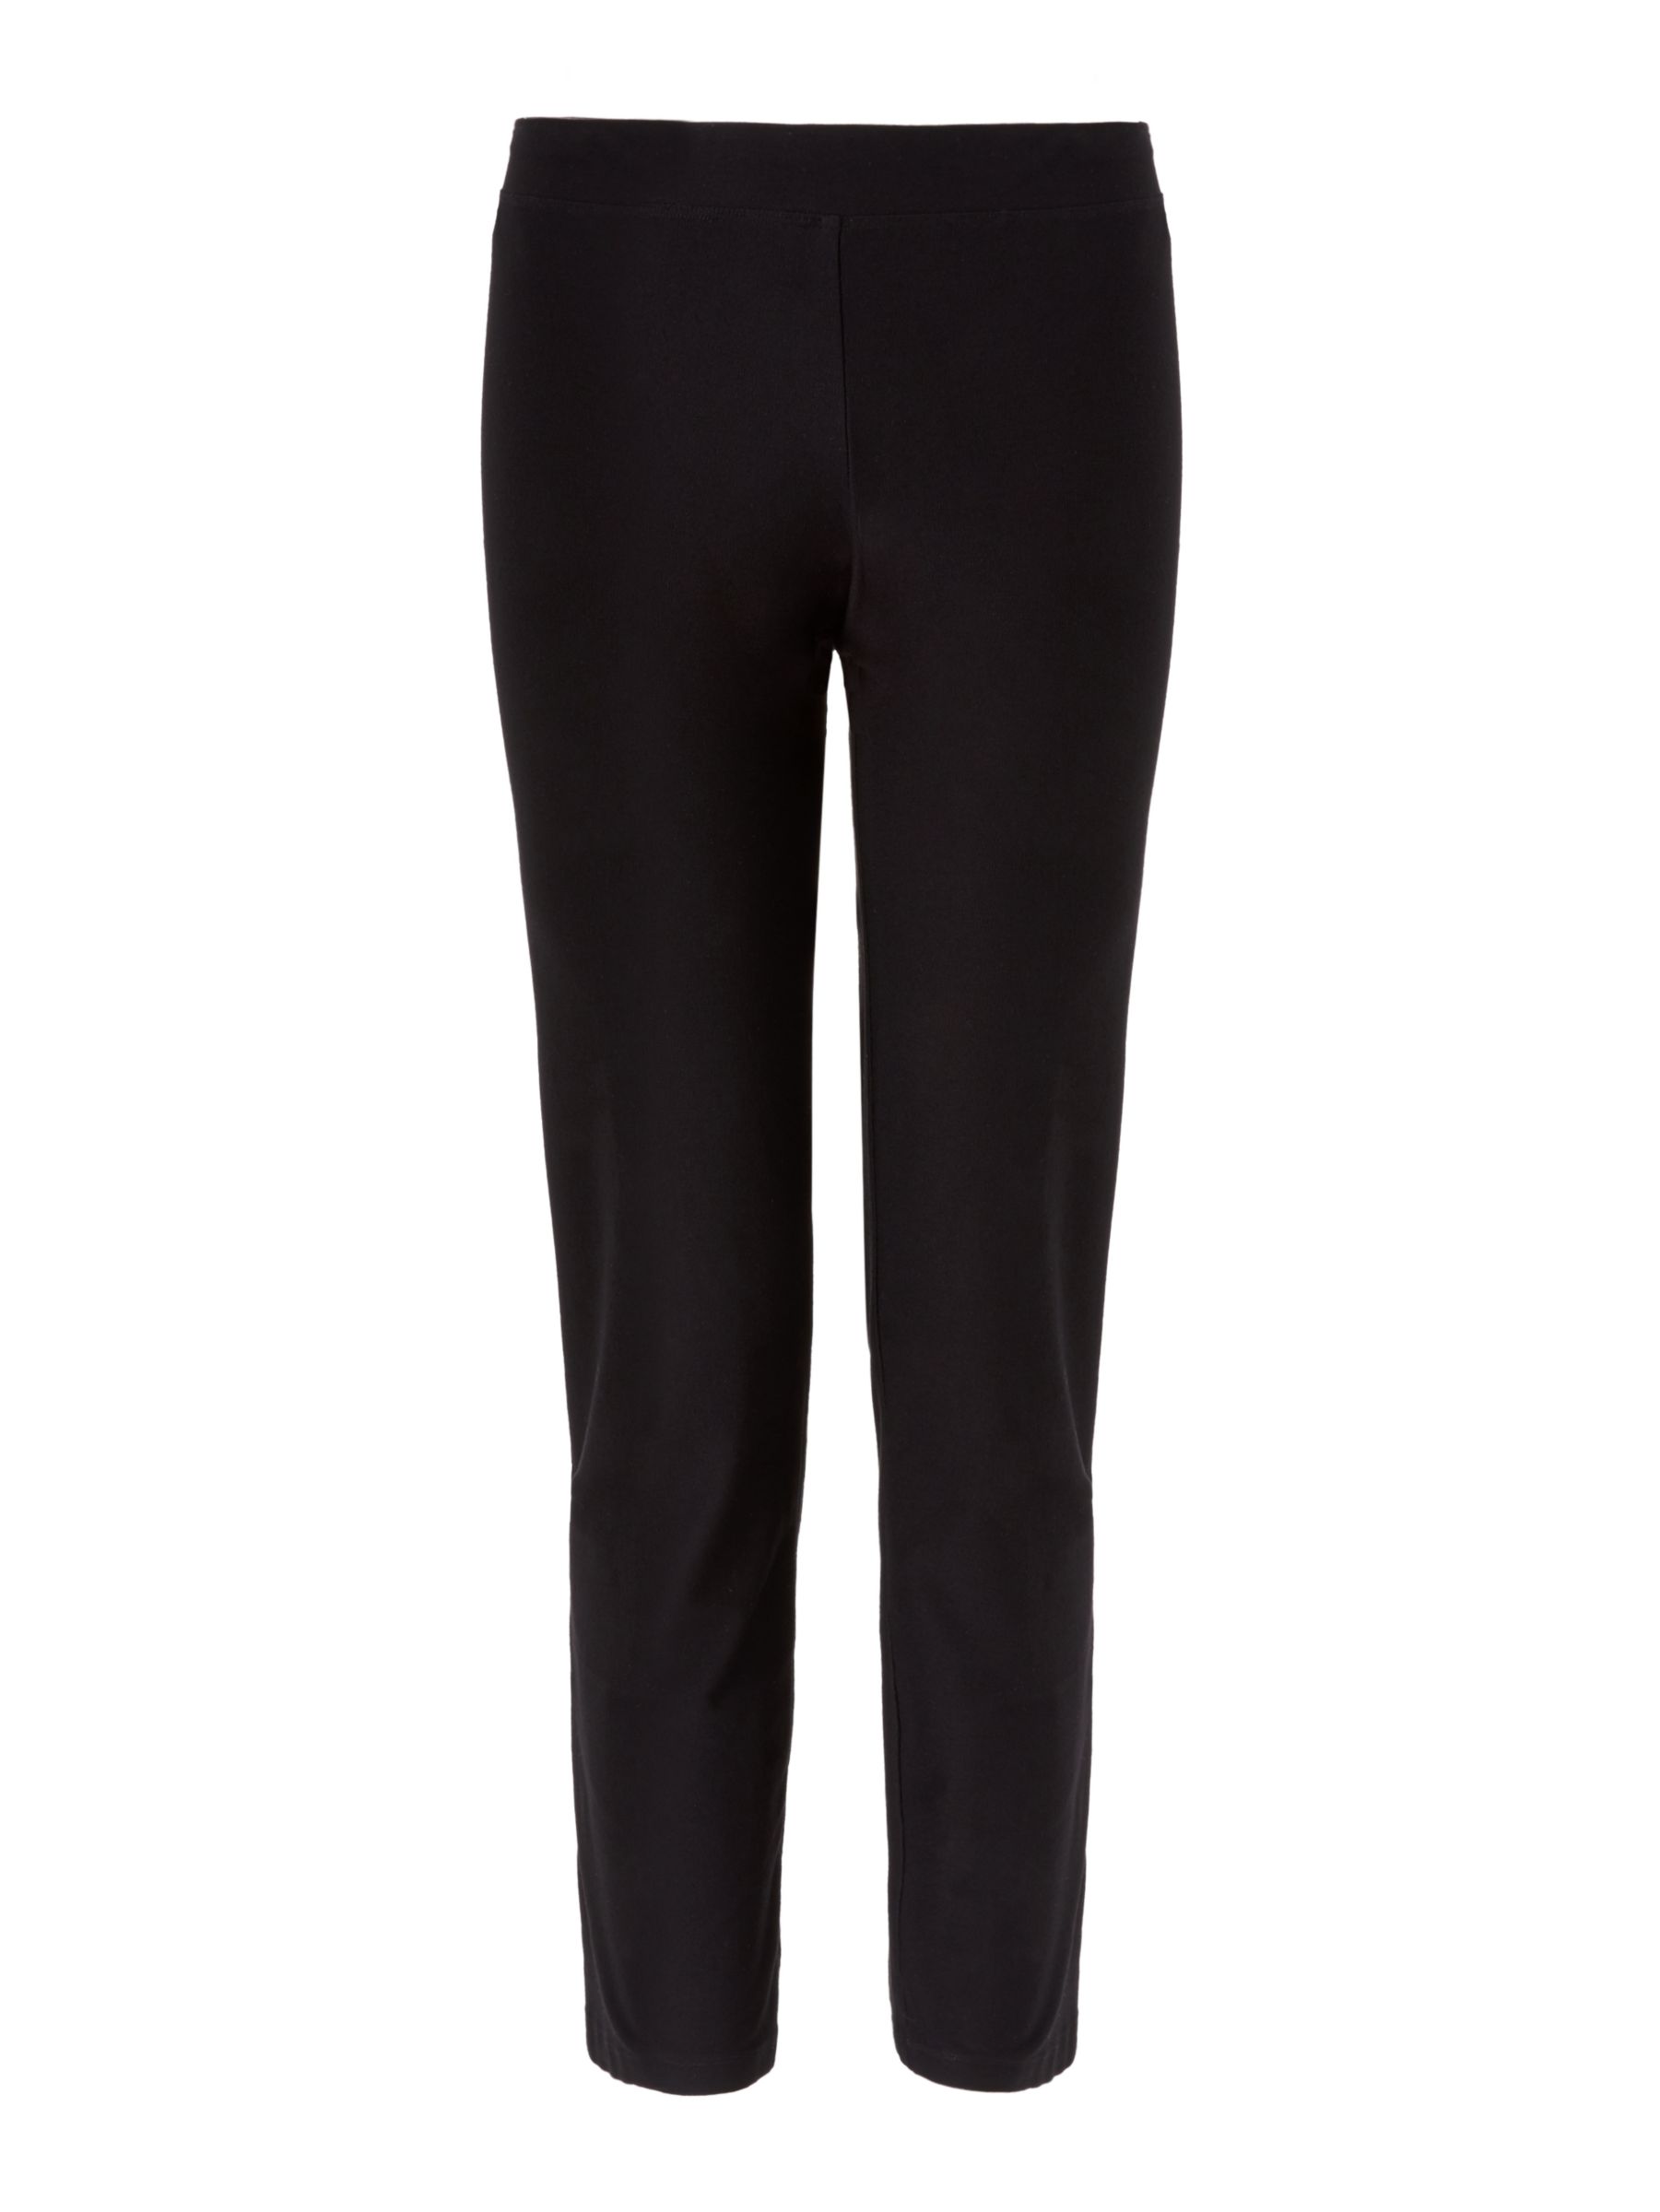 EILEEN FISHER Slim Fit Ankle Trousers, Black at John Lewis & Partners